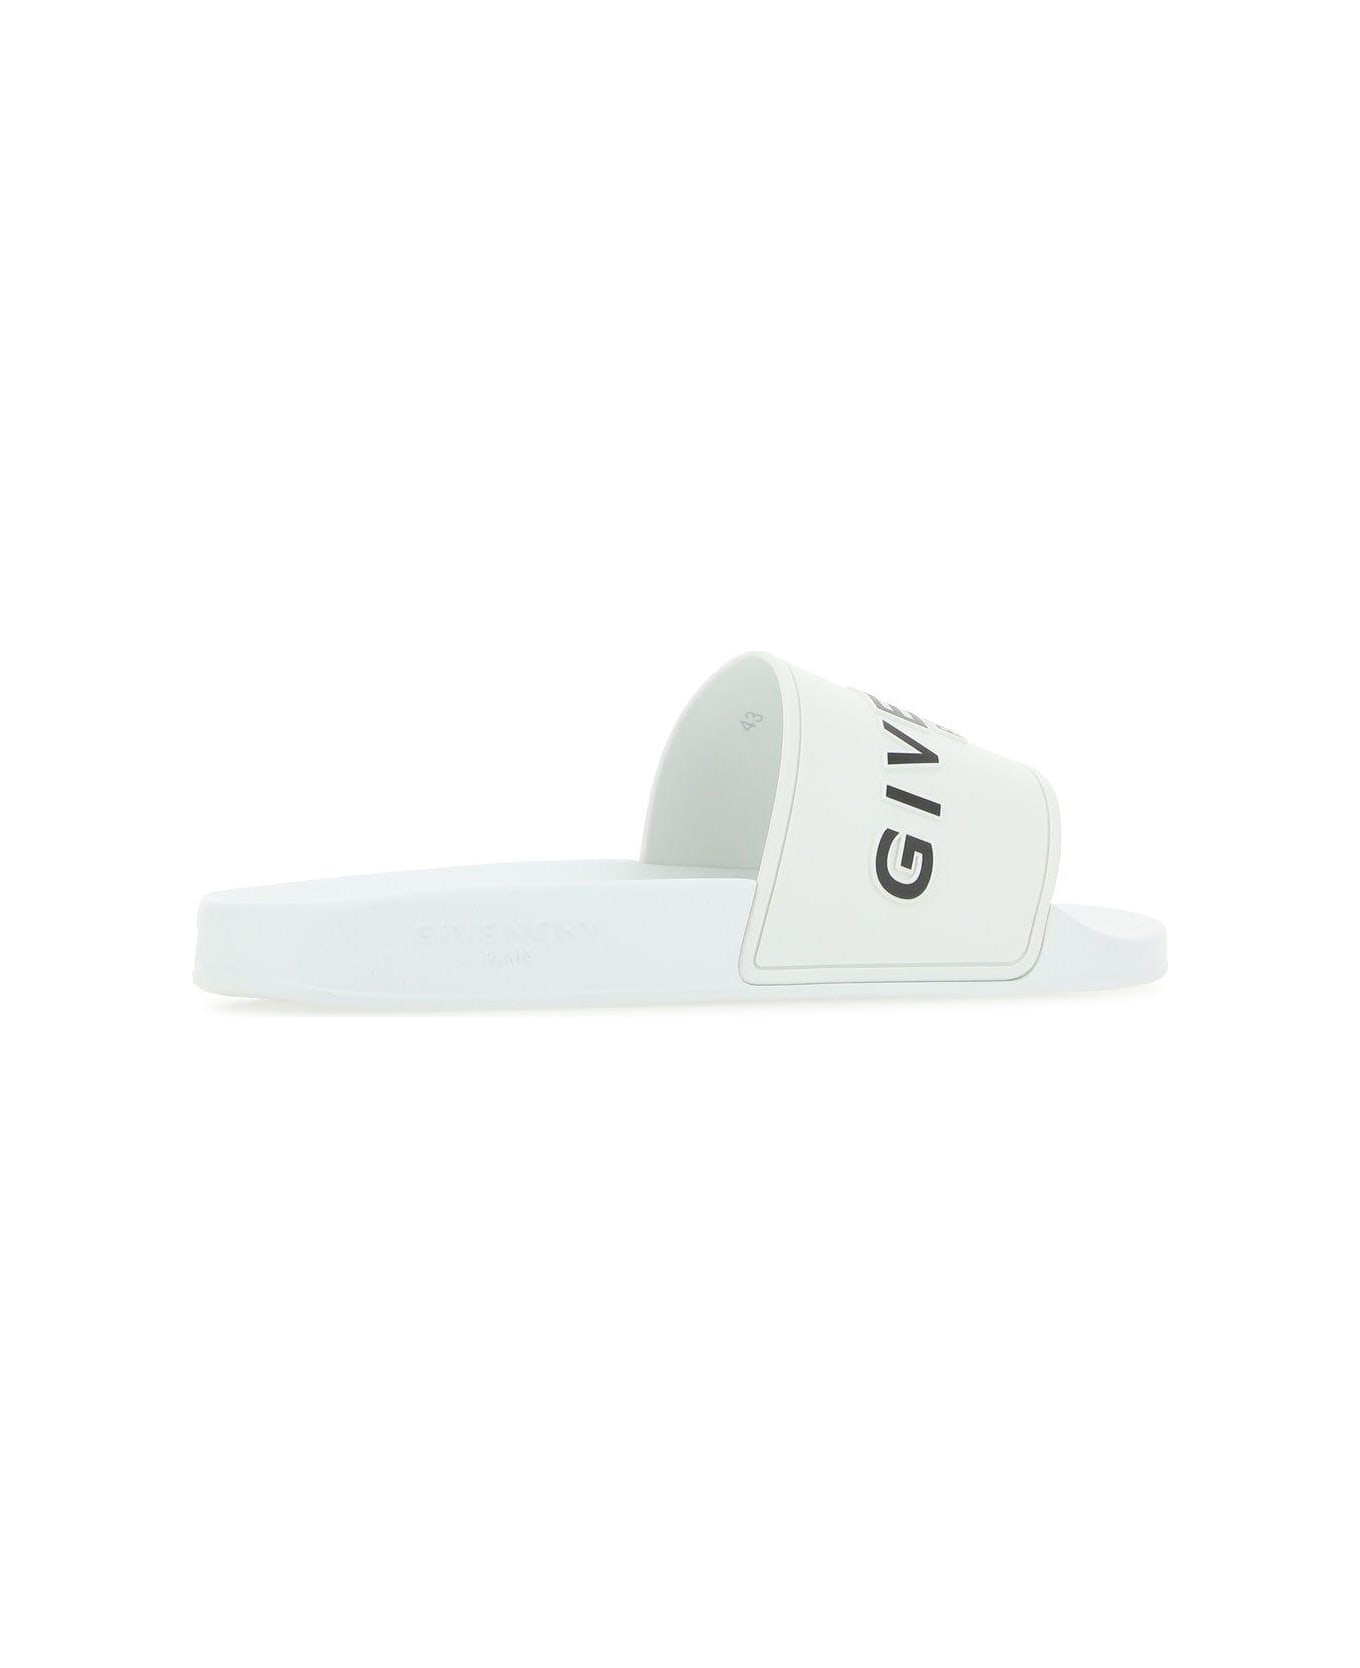 Givenchy White Rubber Slippers - WHITE